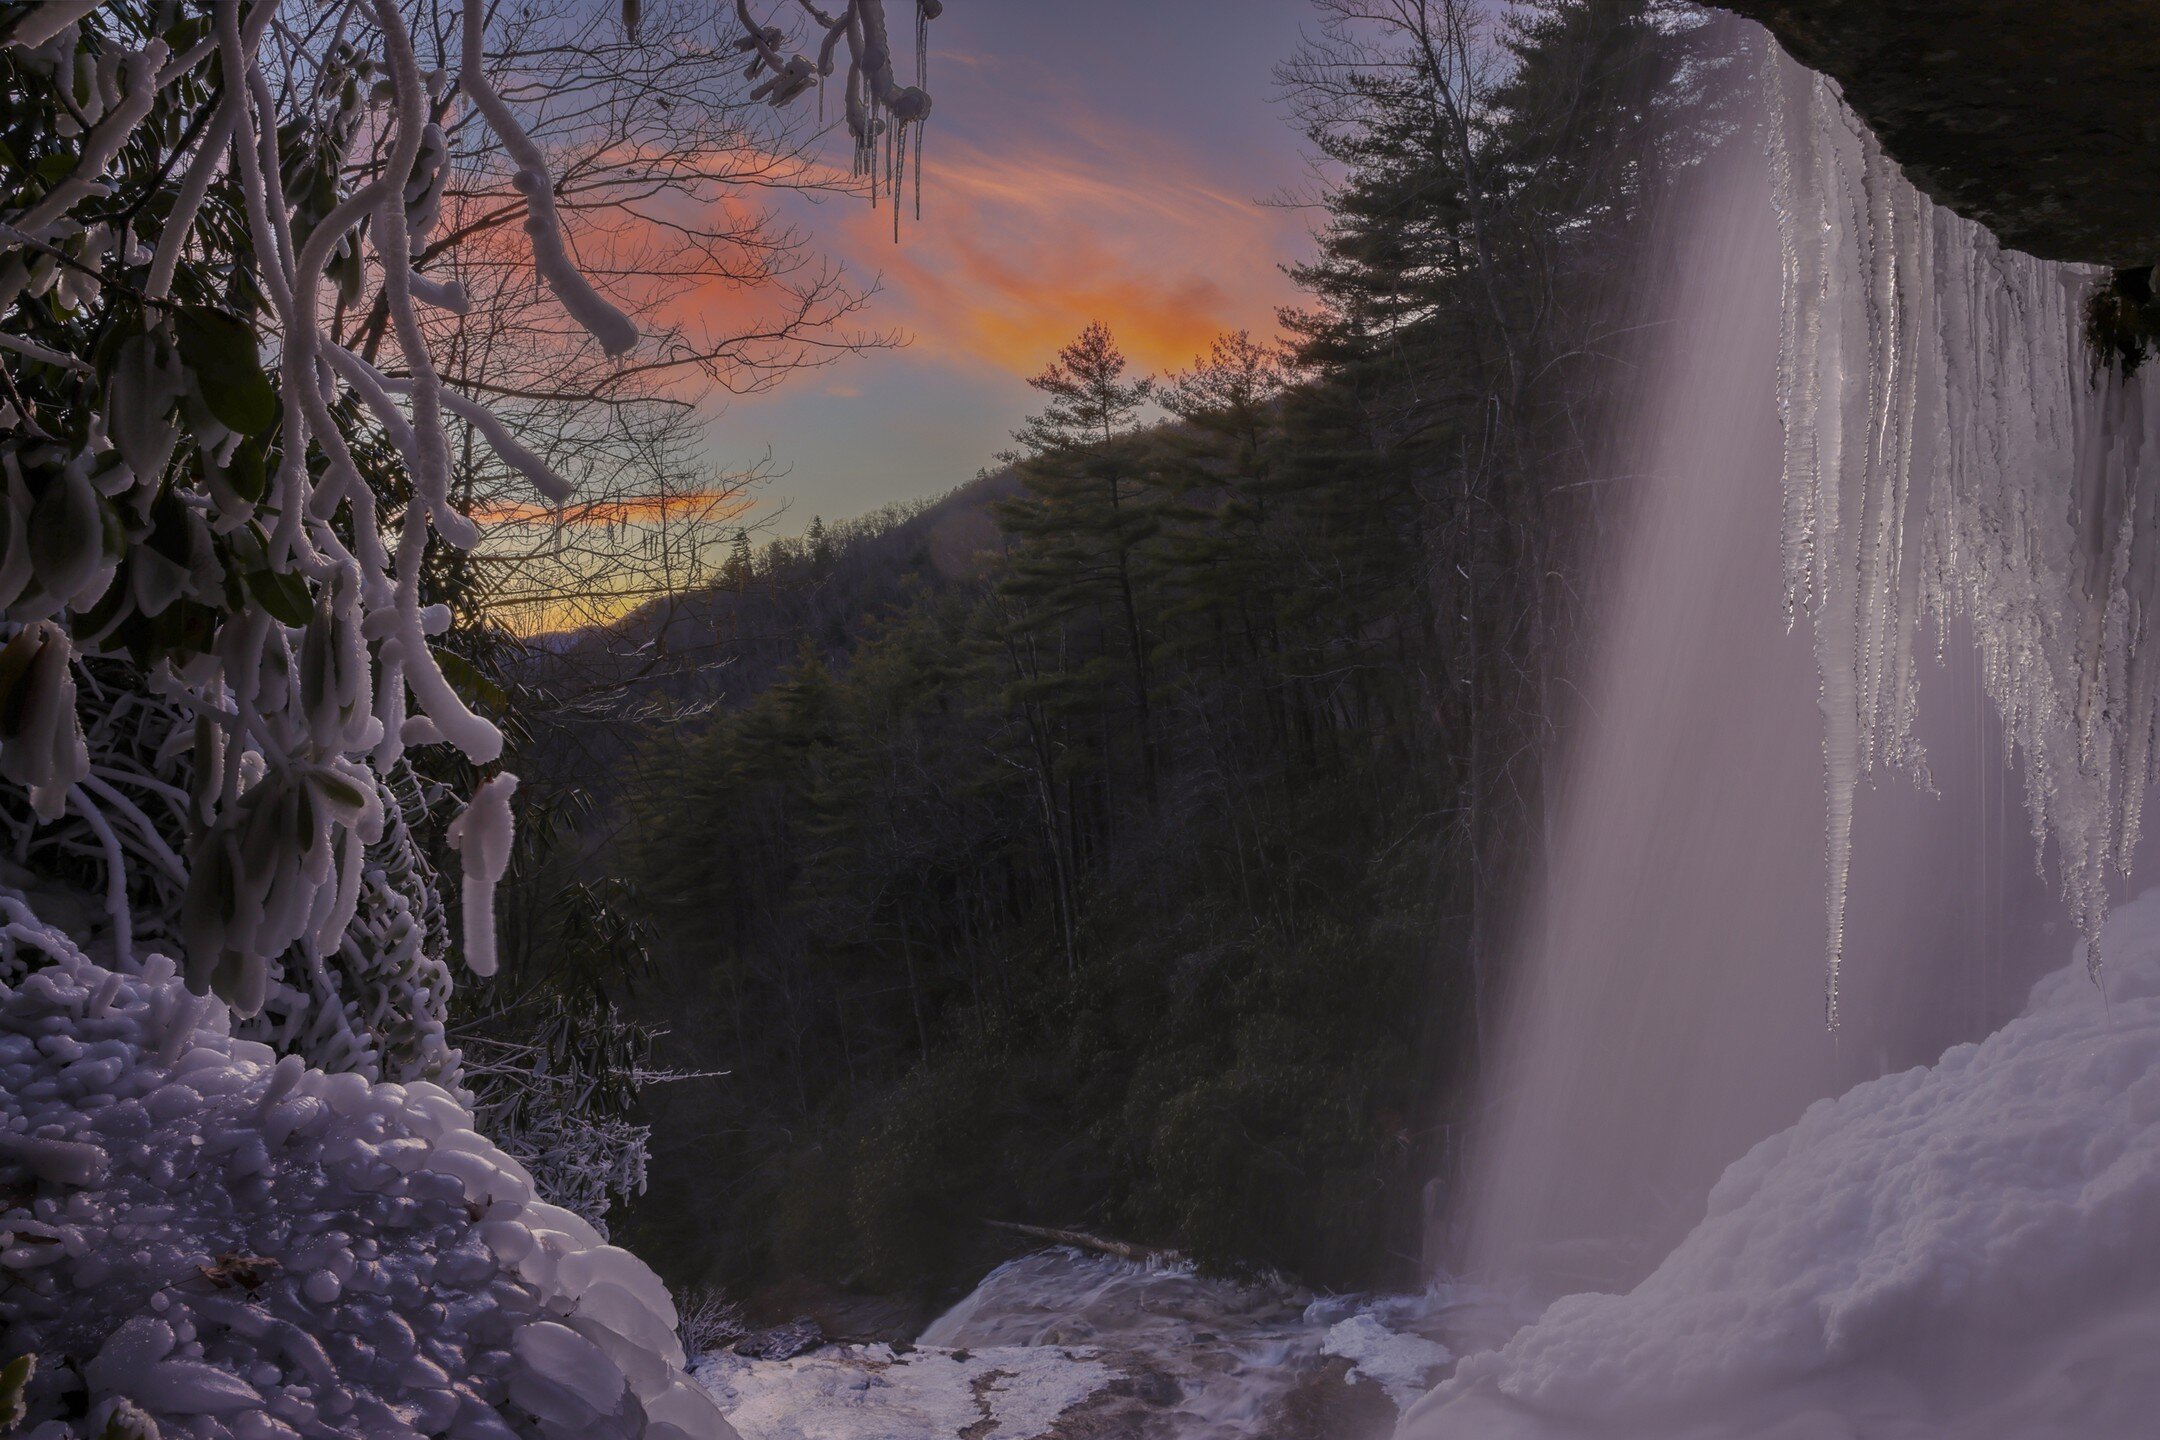 Well, that was a day I&rsquo;ll never forget! Exploring frozen waterfalls in western NC was probably a once-in-a-lifetime opportunity for me. I&rsquo;ll have these photos to remind me of the adventure but never to replace the memories. 

Thanks for p